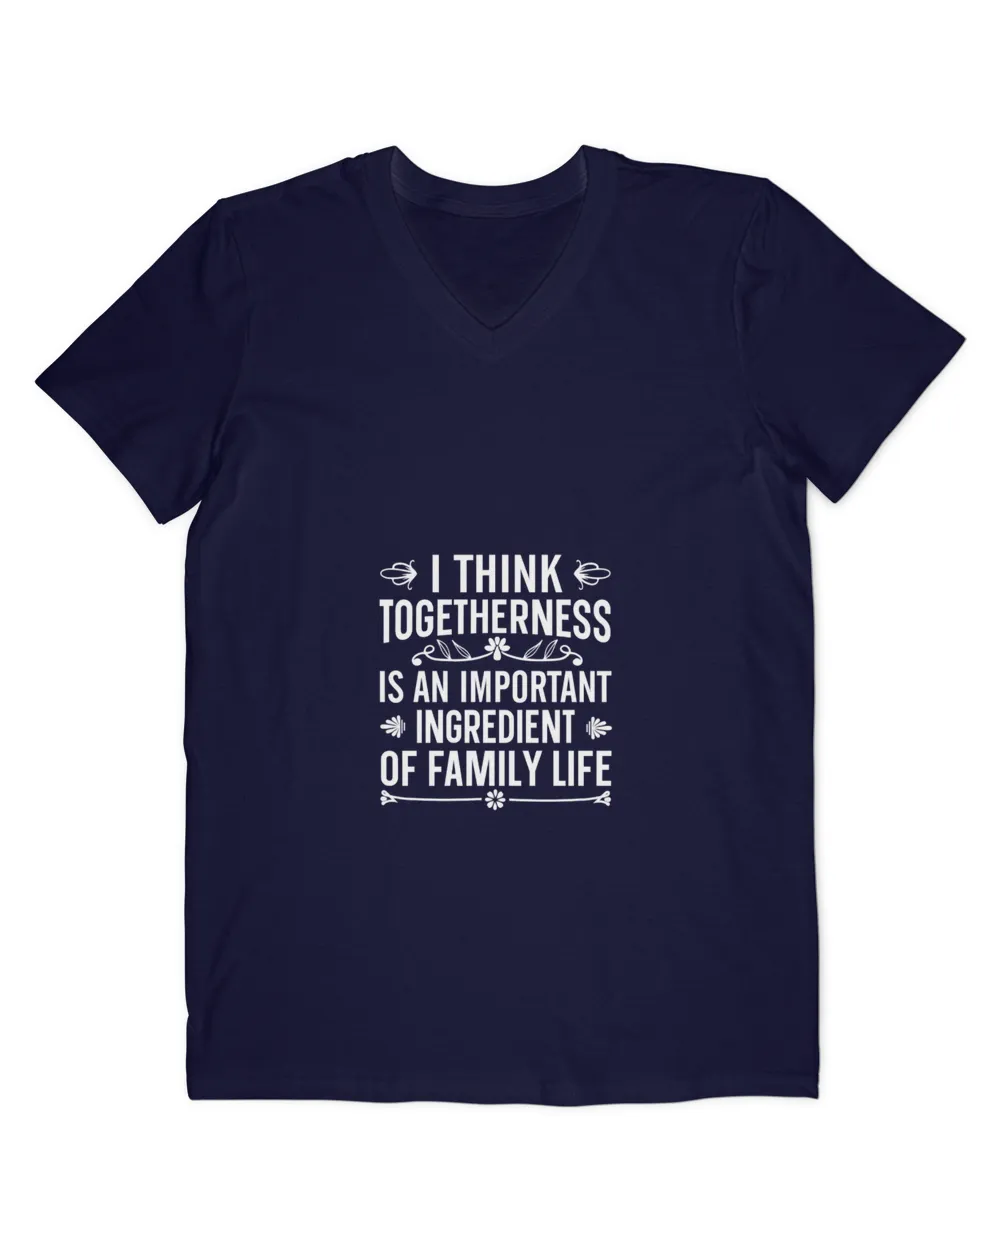 Family T-Shirt, Hoodie, Kids T-Shirt, Toodle & Infant Shirt, Gifts for your Family (16)